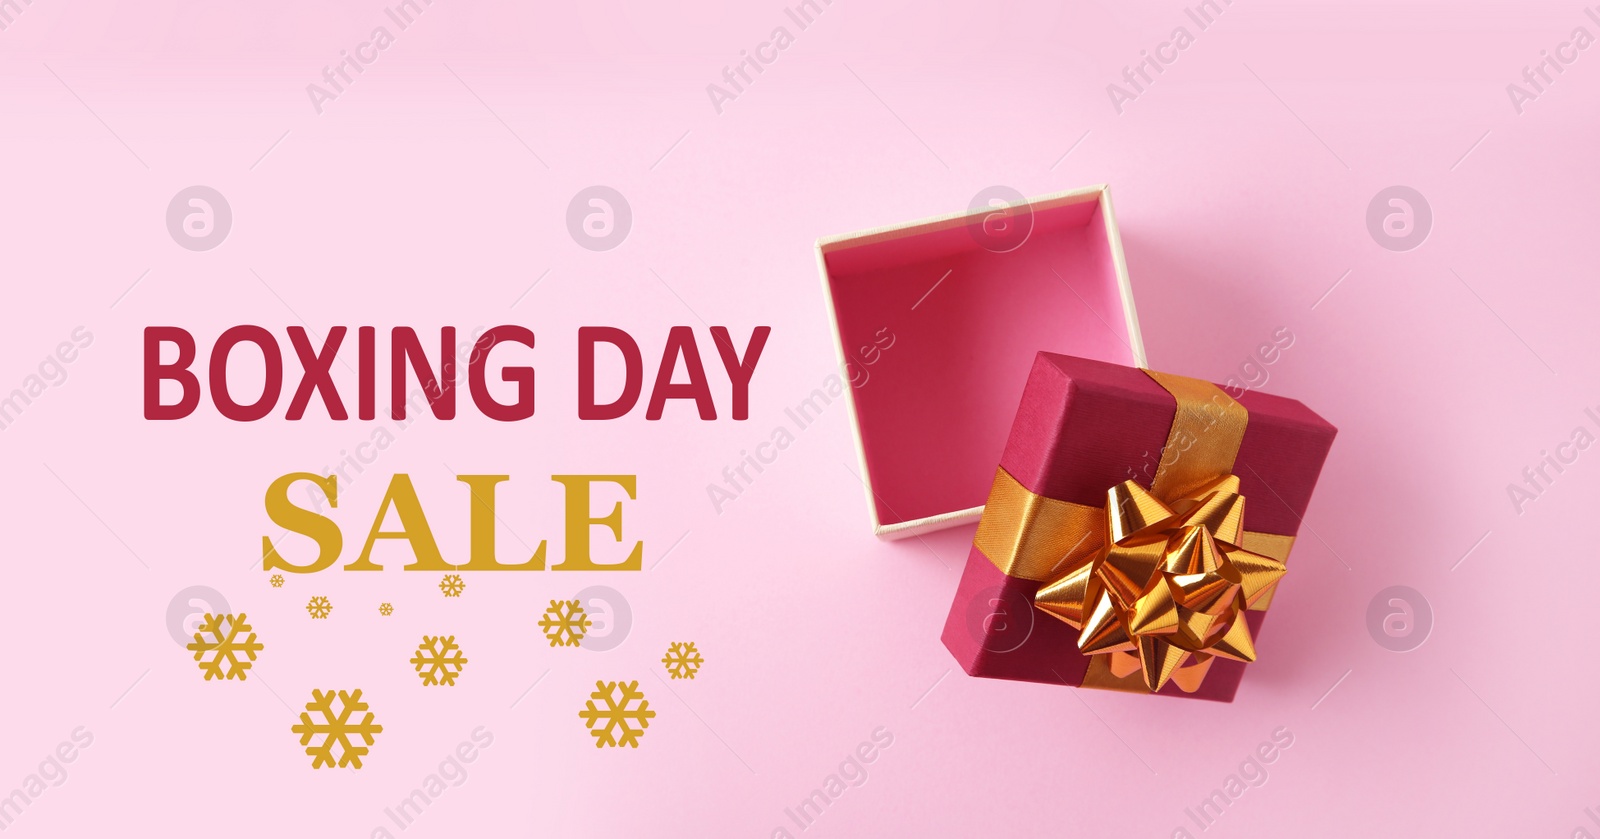 Image of Boxing day sale. Top view of gift on pink background, banner design